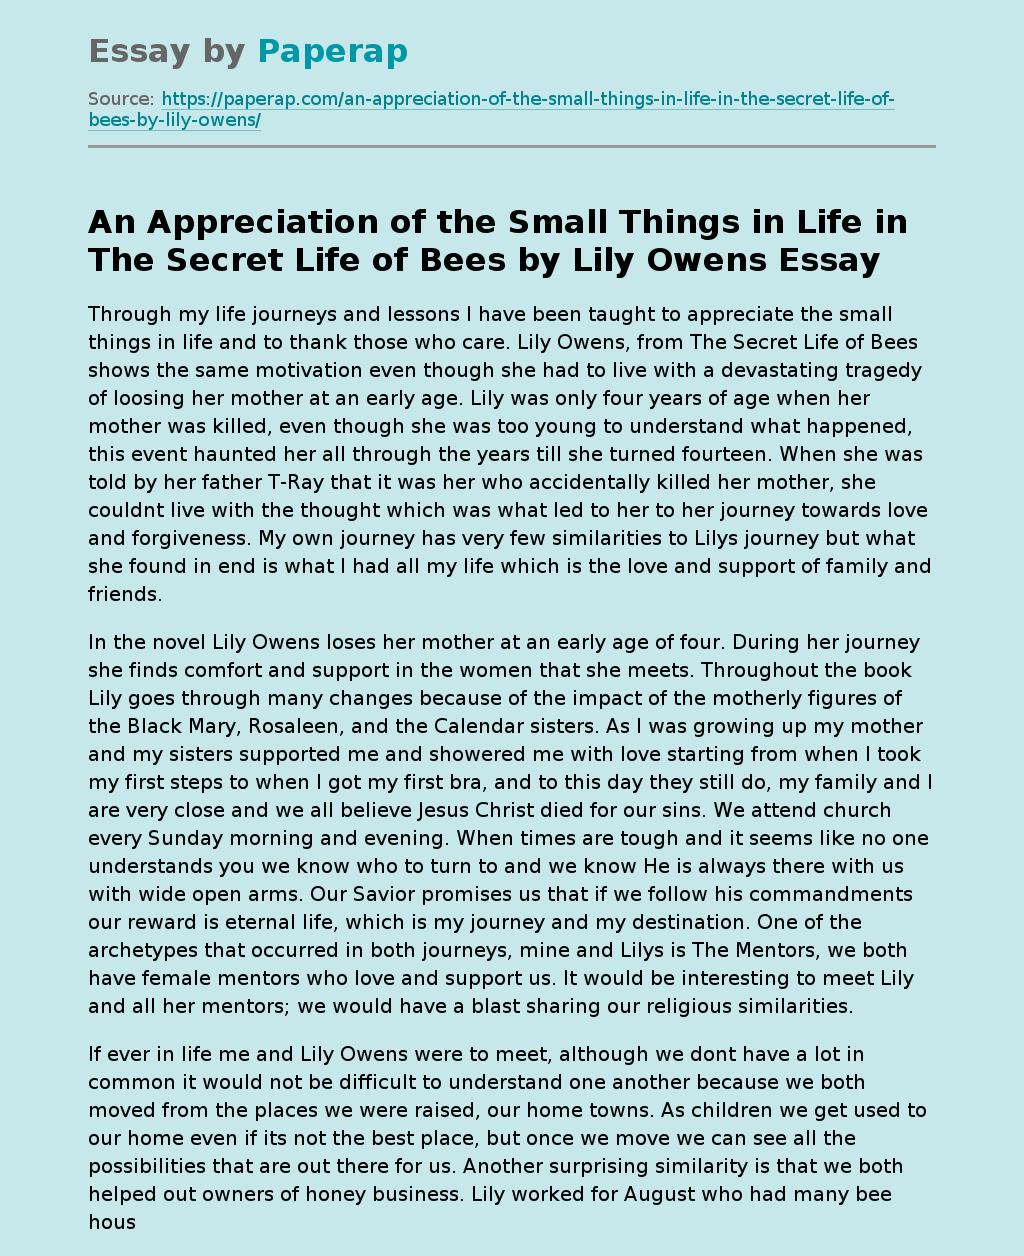 An Appreciation of the Small Things in Life in The Secret Life of Bees by Lily Owens